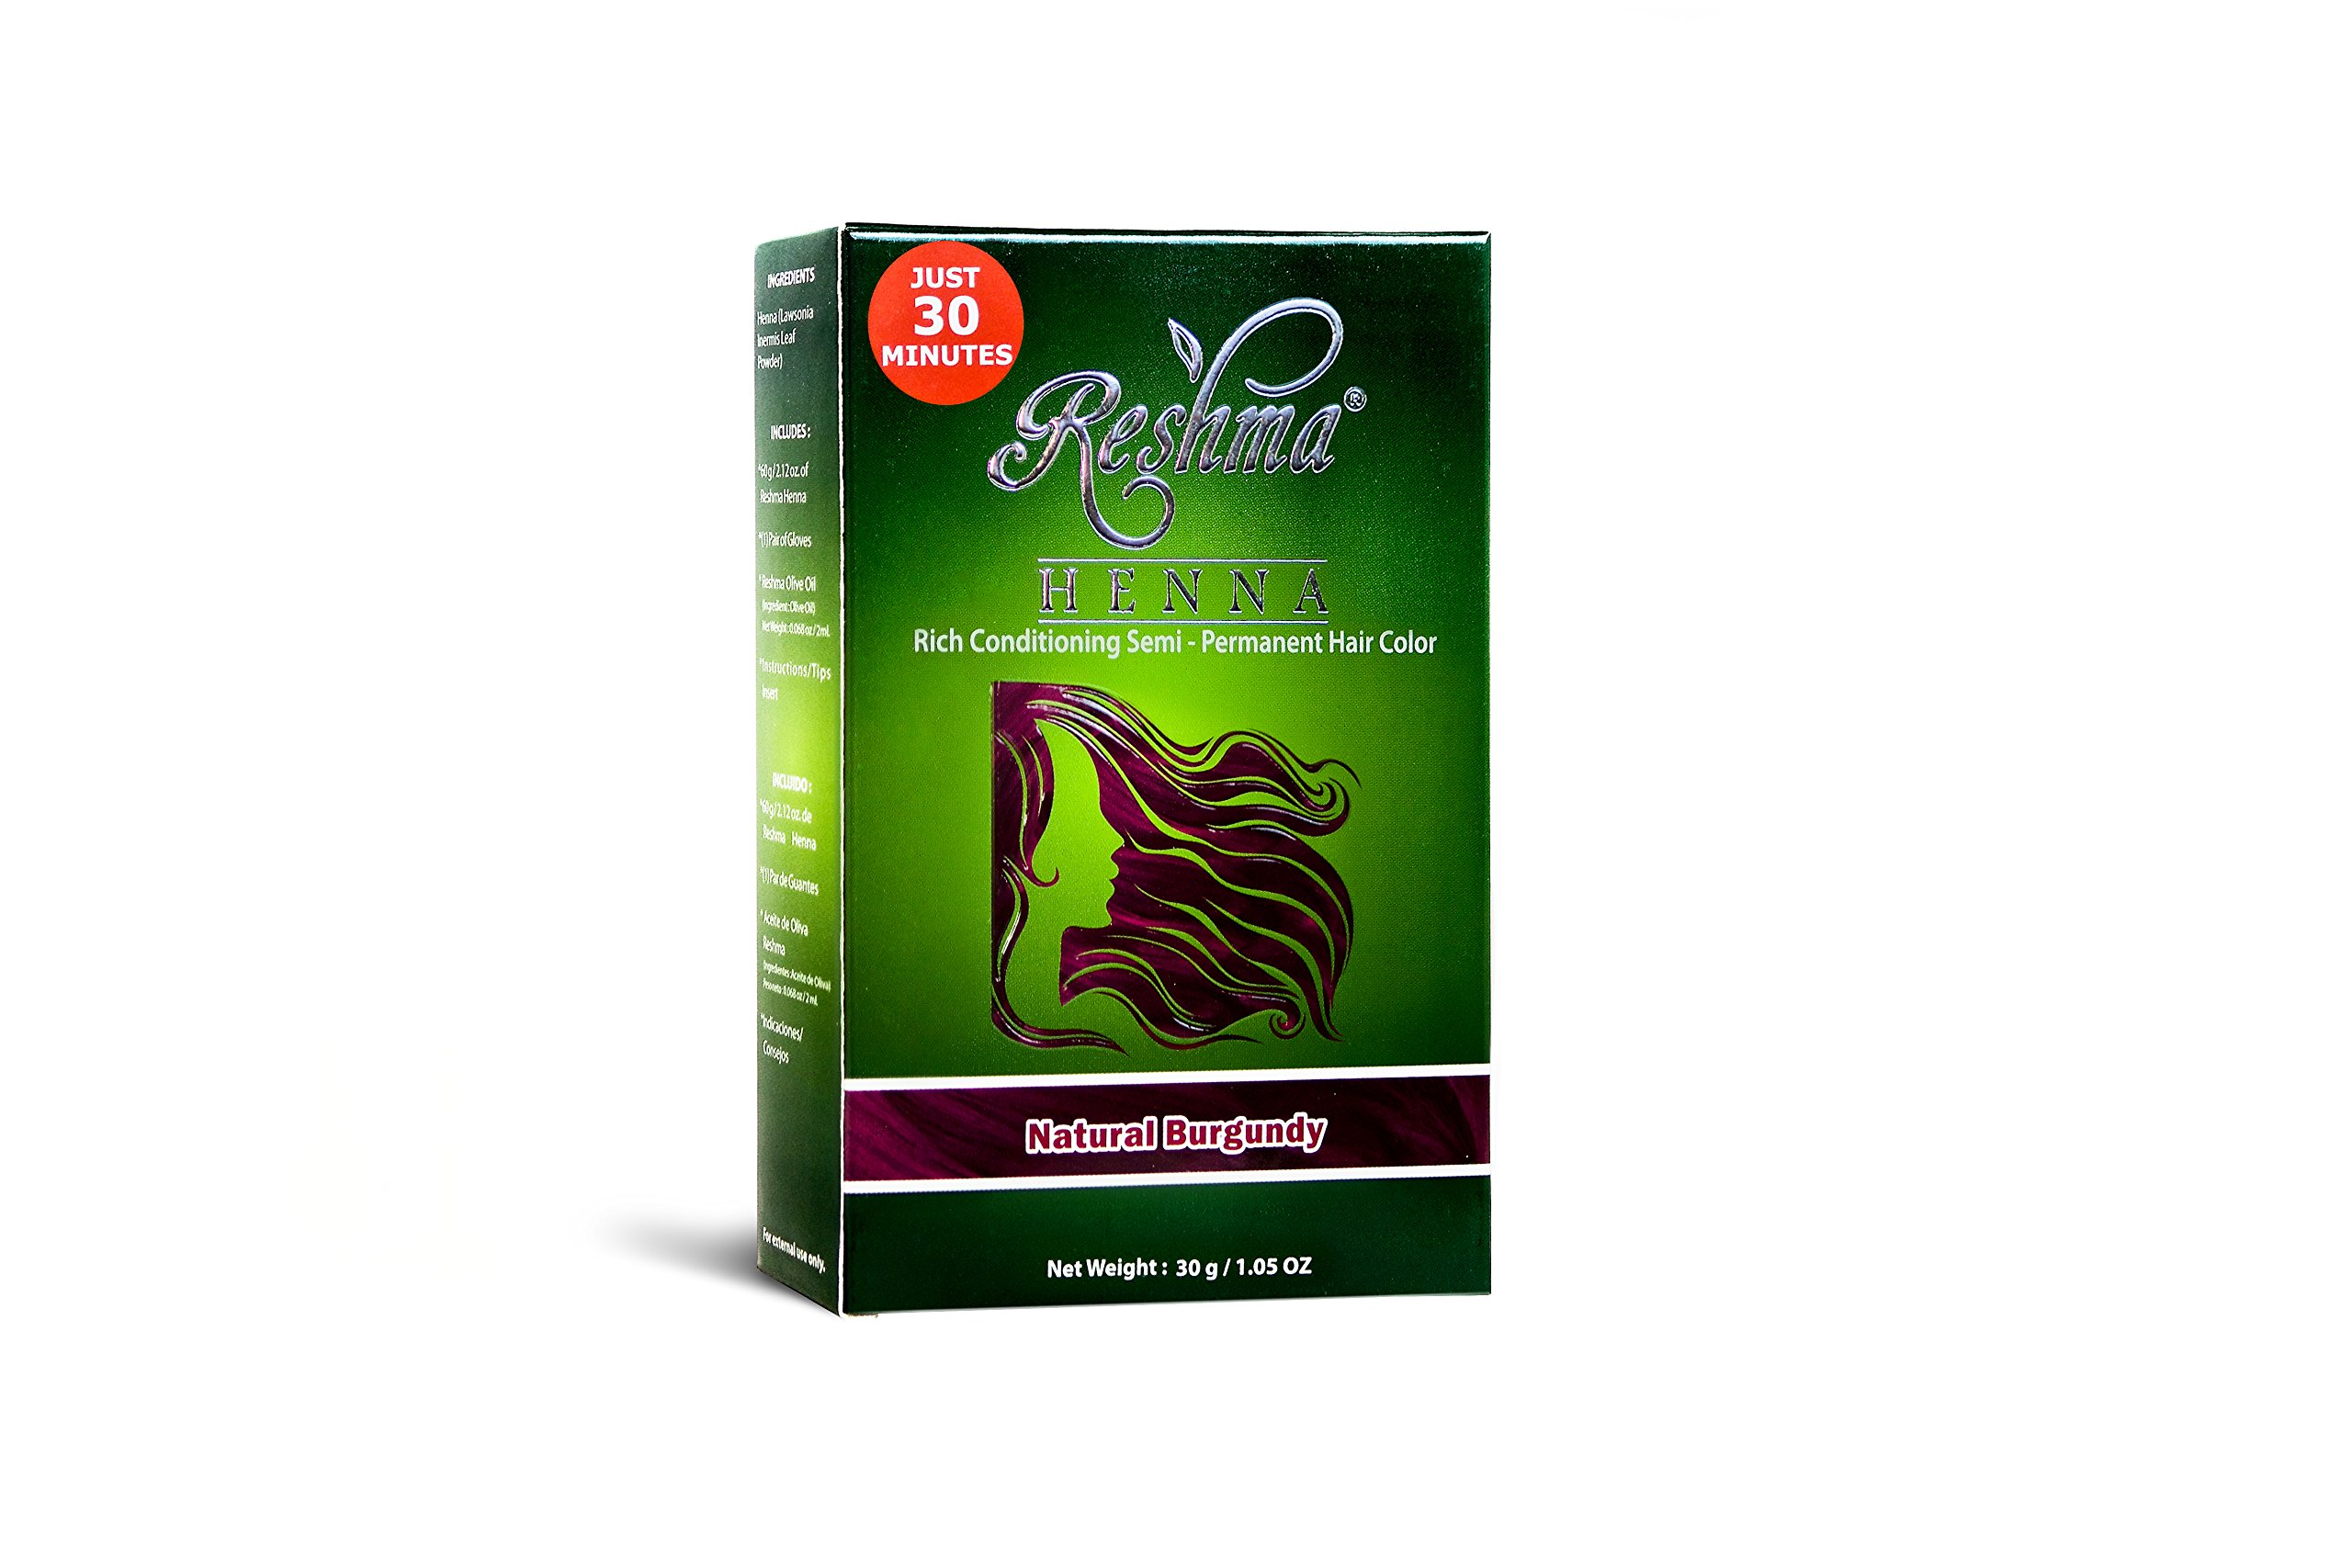 Reshma Beauty 30 Minute Henna Hair Color Infused with Goodness of Herbs, Burgundy, 1.05 Oz